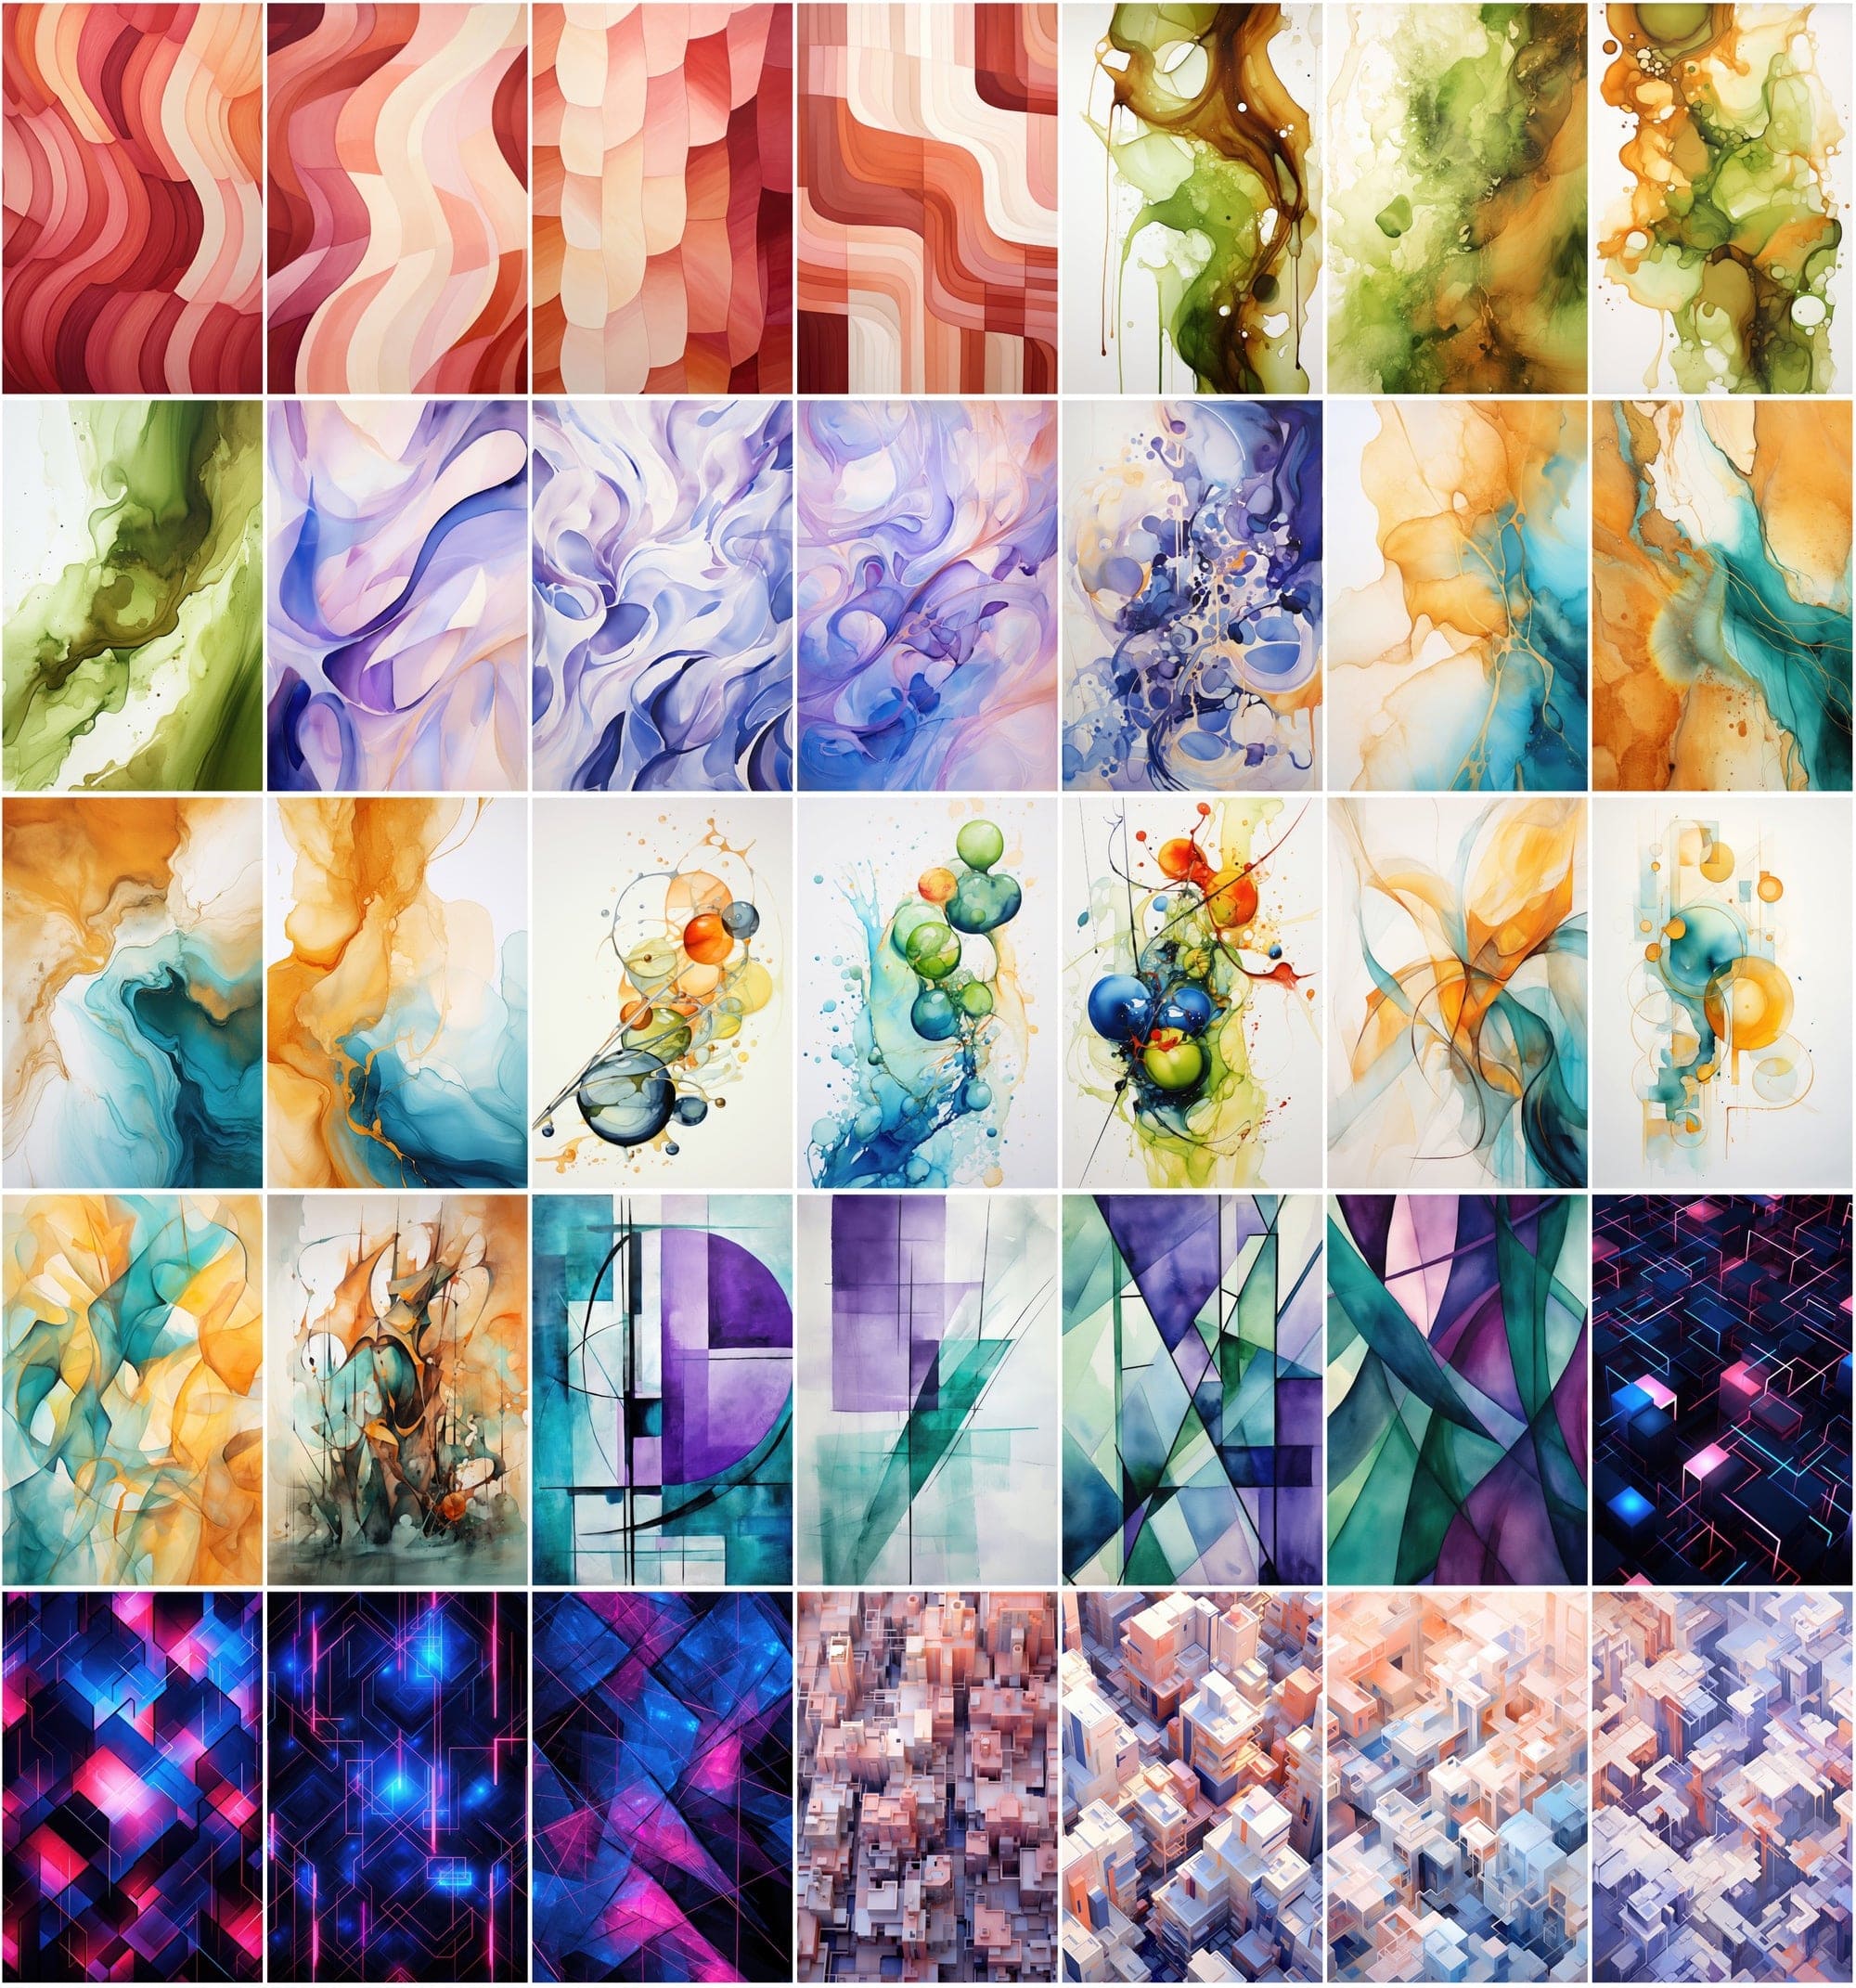 460 Premium Abstract Backgrounds: Action Painting, Geometric Designs, and Modernist Compositions - Commercial License Included Digital Download Sumobundle